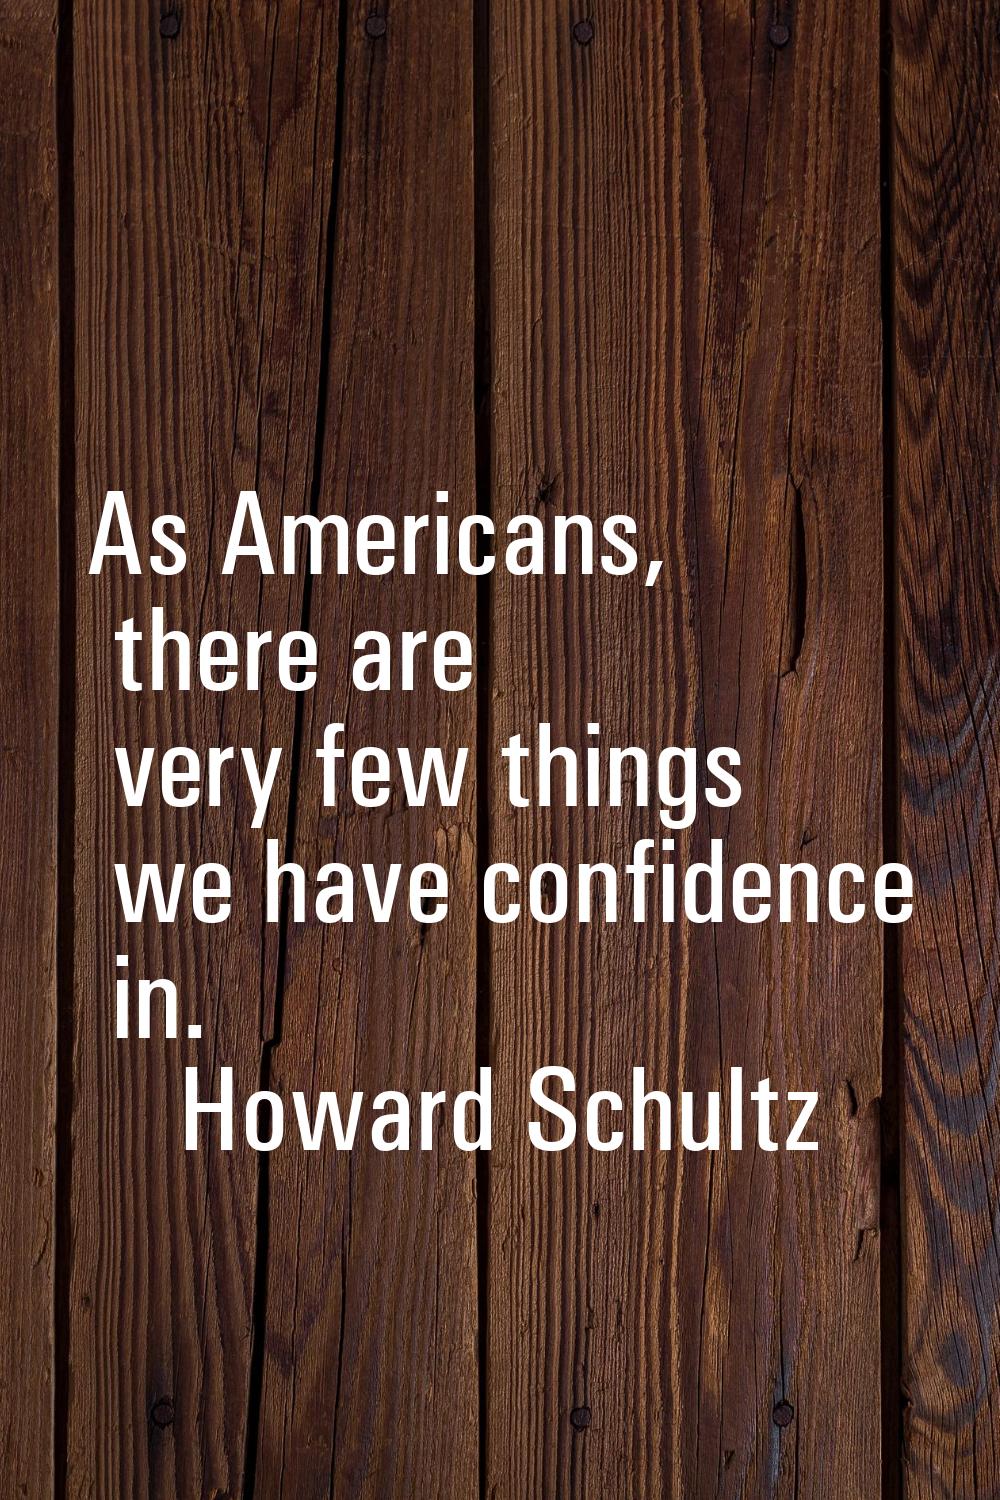 As Americans, there are very few things we have confidence in.